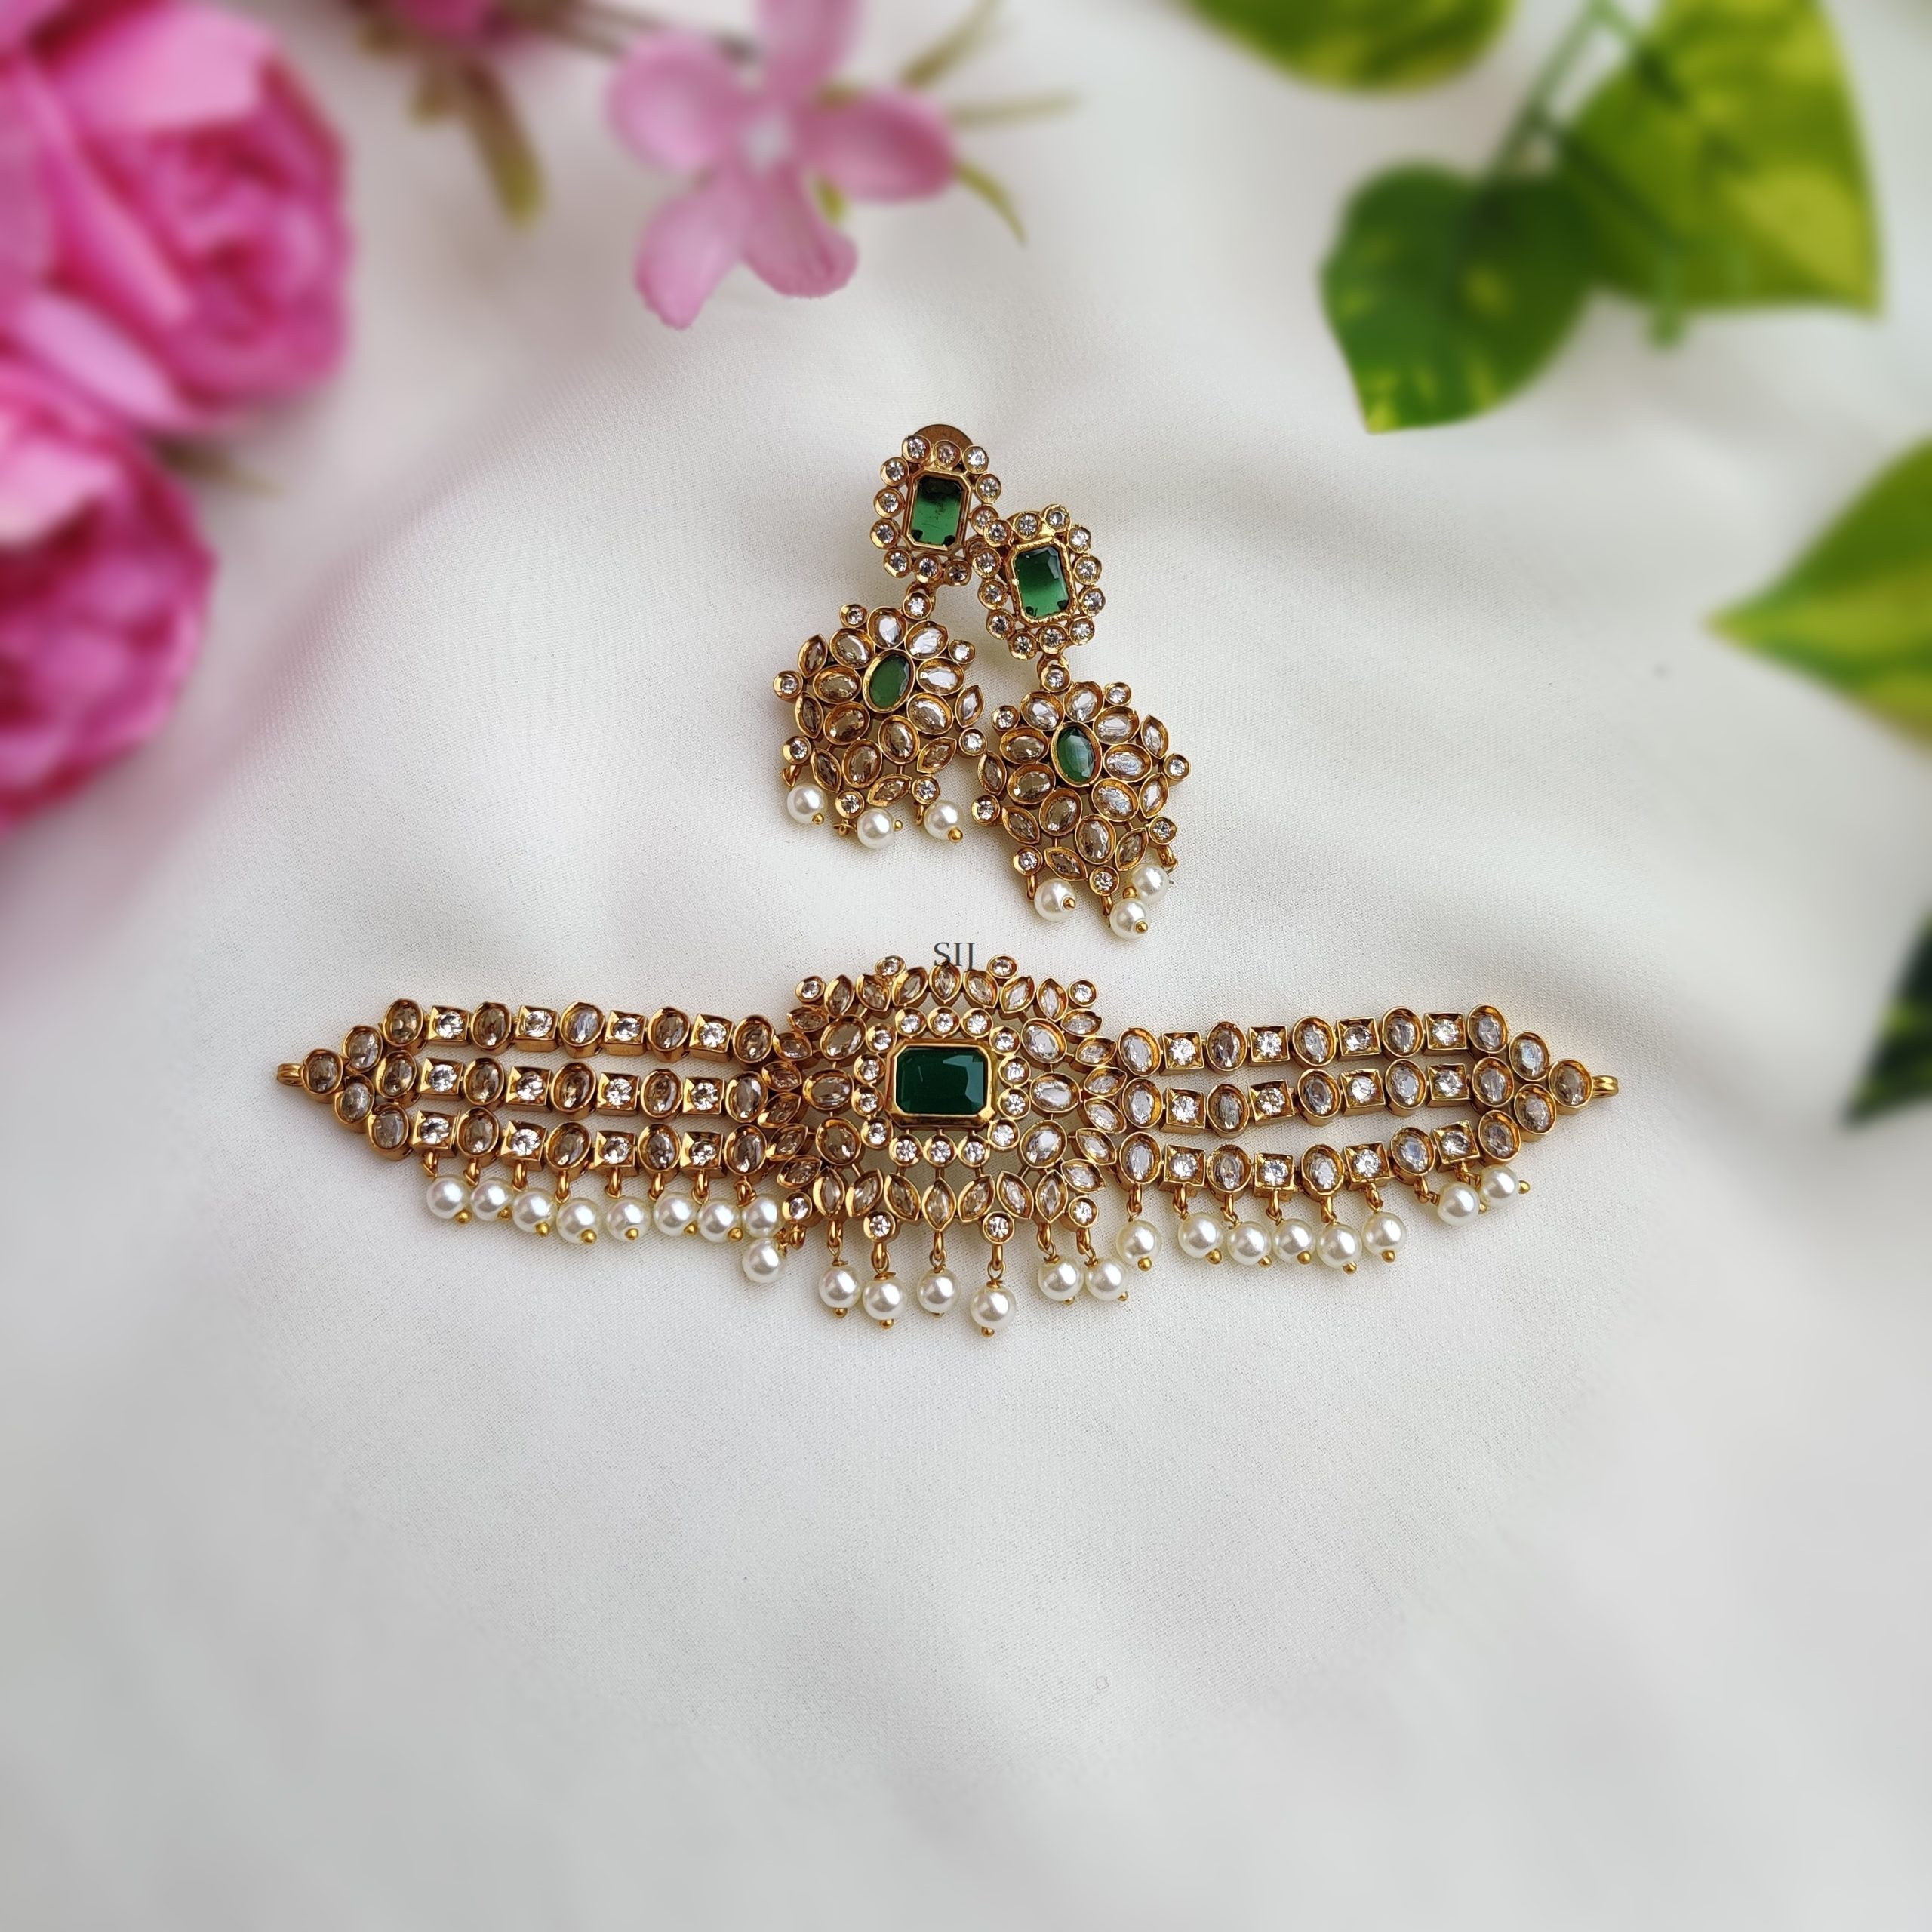 A stunning white pearl green Kundan choker set, epitomizing opulence and elegance. The radiant green Kundan stones harmonize with lustrous white pearls, exuding regal charm. Meticulously crafted with intricate detailing, it adds a touch of sophistication to any attire, perfect for those seeking to make a statement with timeless grace. A stunning white pearl green Kundan choker set, epitomizing opulence and elegance. The radiant green Kundan stones harmonize with lustrous white pearls, exuding regal charm. Meticulously crafted with intricate detailing, it adds a touch of sophistication to any attire, perfect for those seeking to make a statement with timeless grace. A stunning white pearl green Kundan choker set, epitomizing opulence and elegance. The radiant green Kundan stones harmonize with lustrous white pearls, exuding regal charm. Meticulously crafted with intricate detailing, it adds a touch of sophistication to any attire, perfect for those seeking to make a statement with timeless grace. A stunning white pearl green Kundan choker set, epitomizing opulence and elegance. The radiant green Kundan stones harmonize with lustrous white pearls, exuding regal charm. Meticulously crafted with intricate detailing, it adds a touch of sophistication to any attire, perfect for those seeking to make a statement with timeless grace. White Pearl Green Kundan Choker set